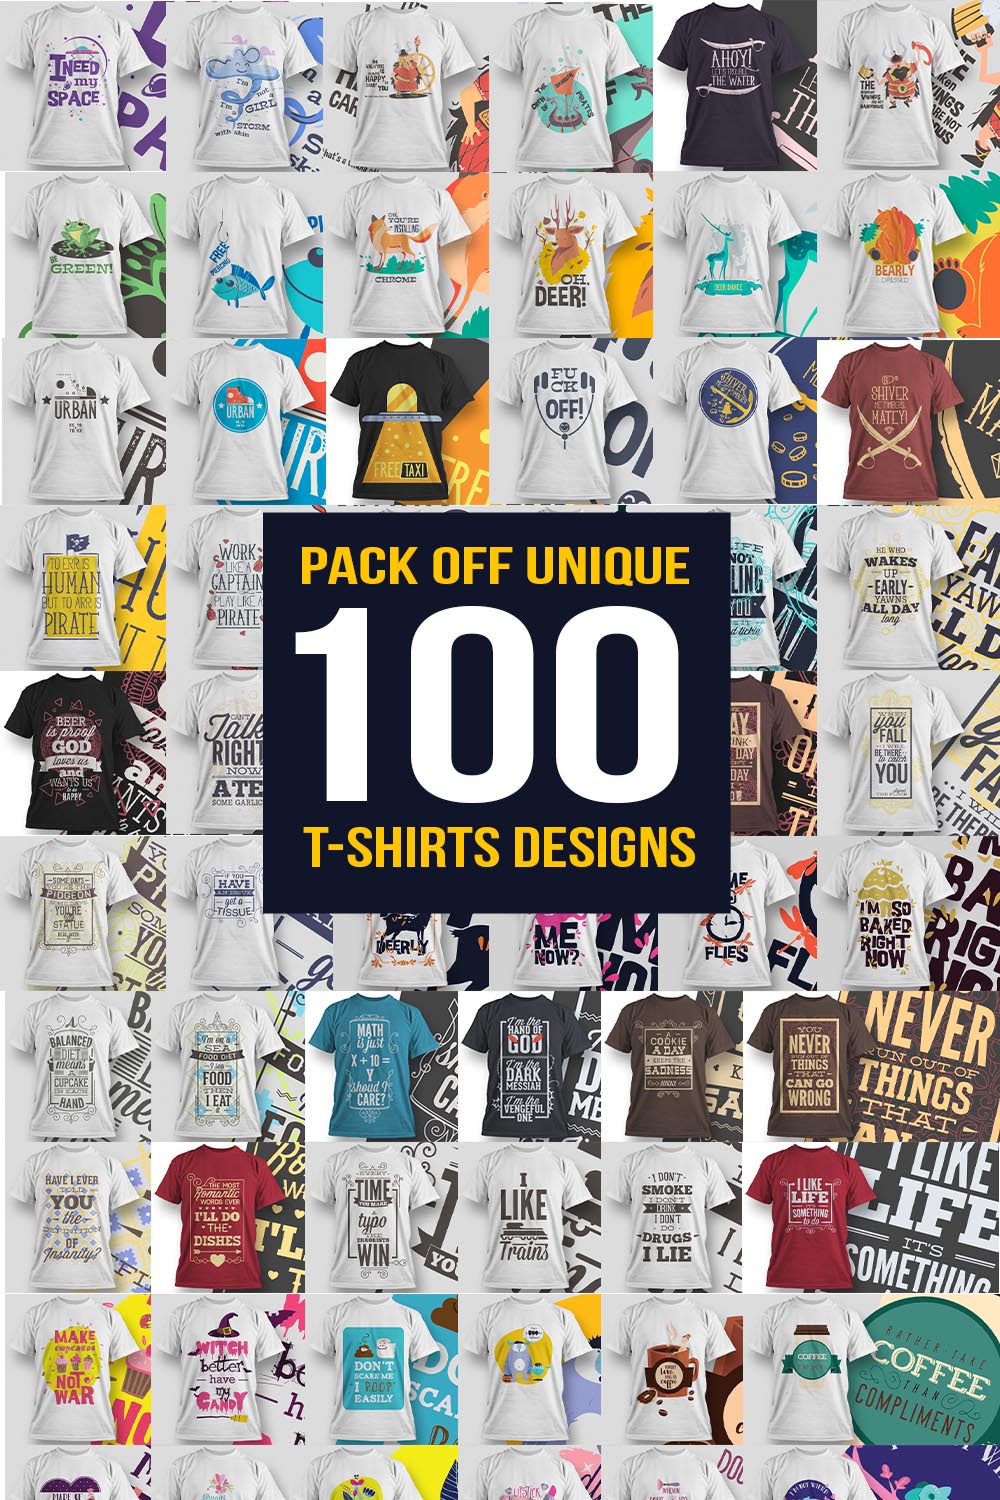 pintrest an awesome collection of t-shirt designs.